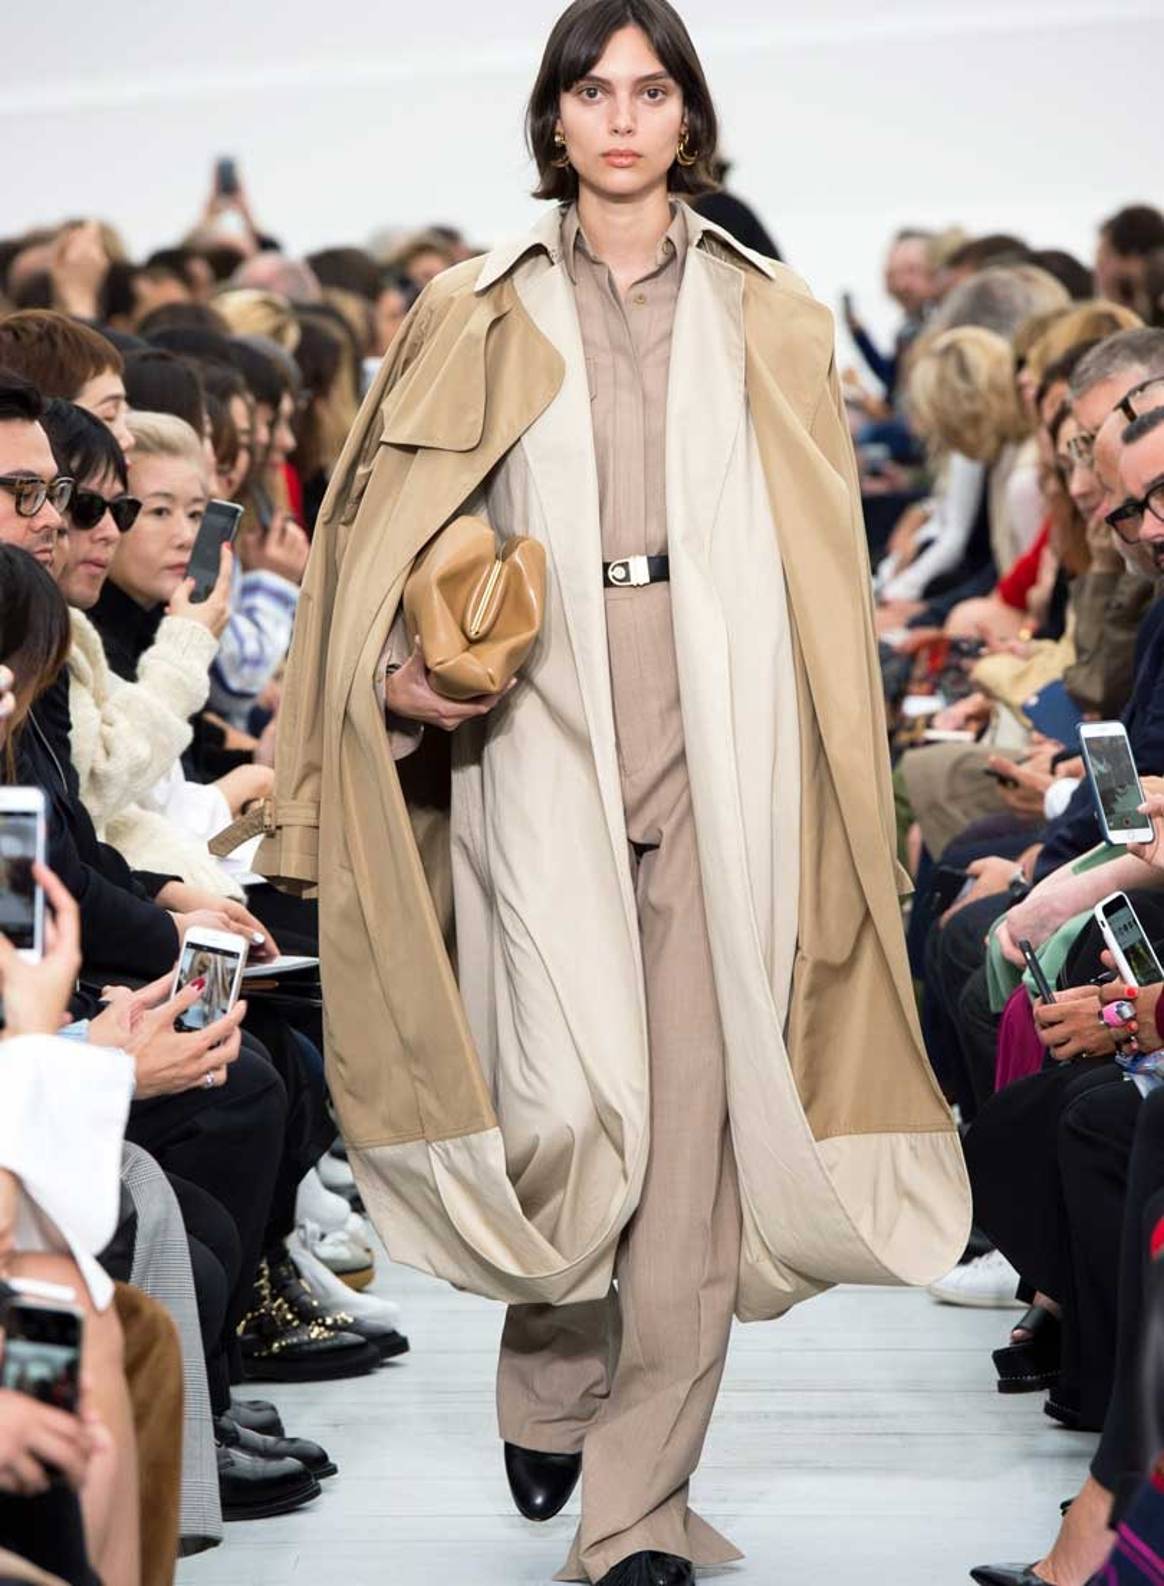 The 5 top trends at Paris Fashion Week